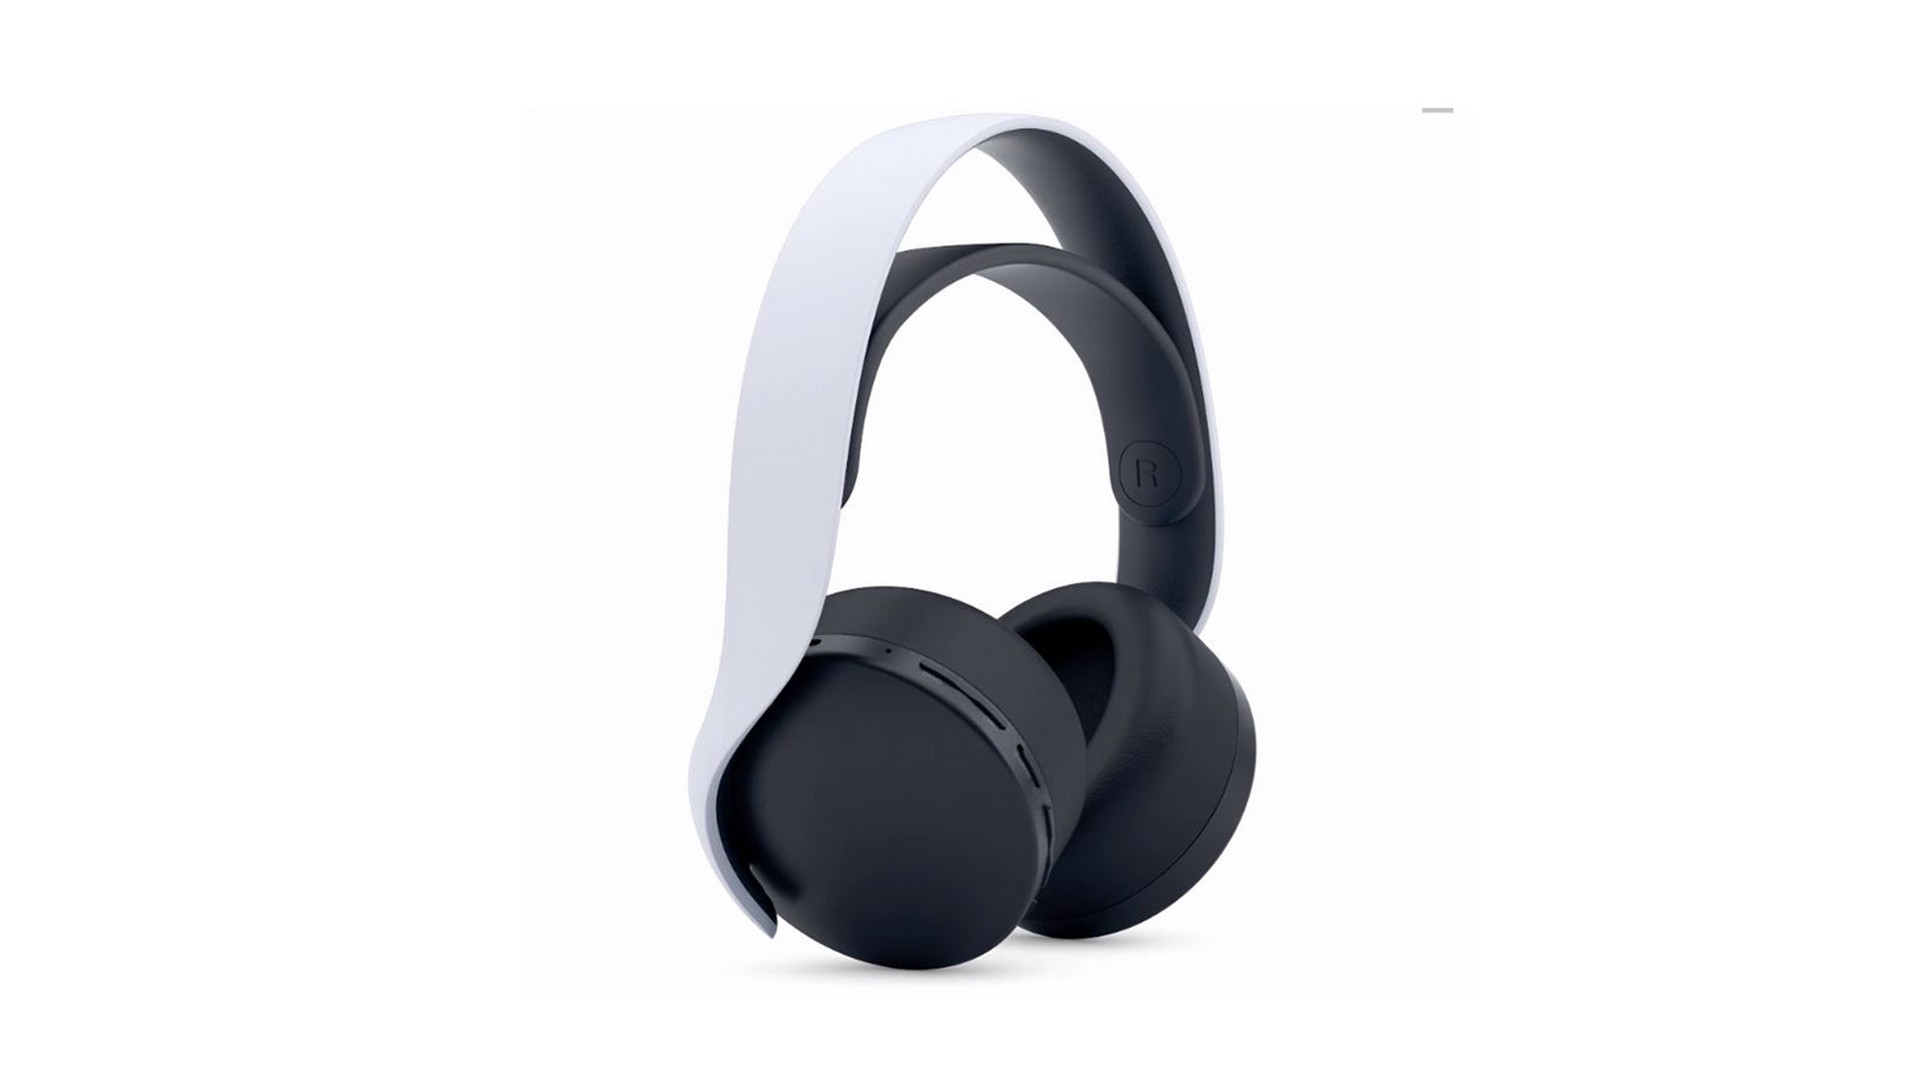 Tai nghe PS5 không dây Sony Pulse 3D Wireless Headset White